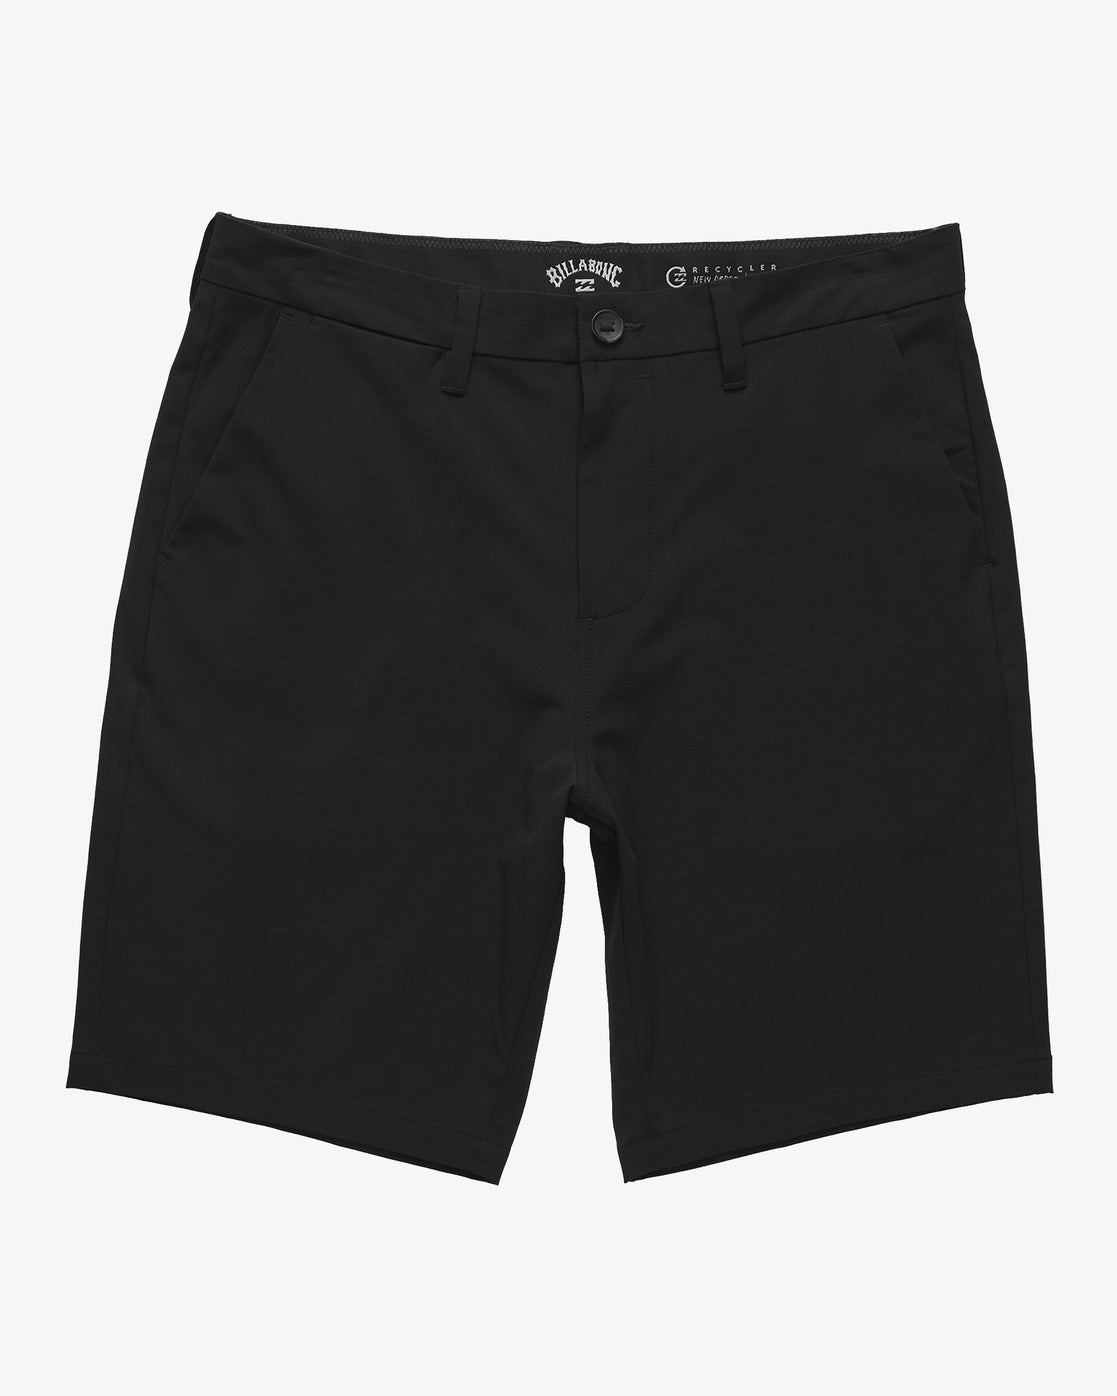 Crossfire Solid Submersible Shorts 20" - ABYWS00195